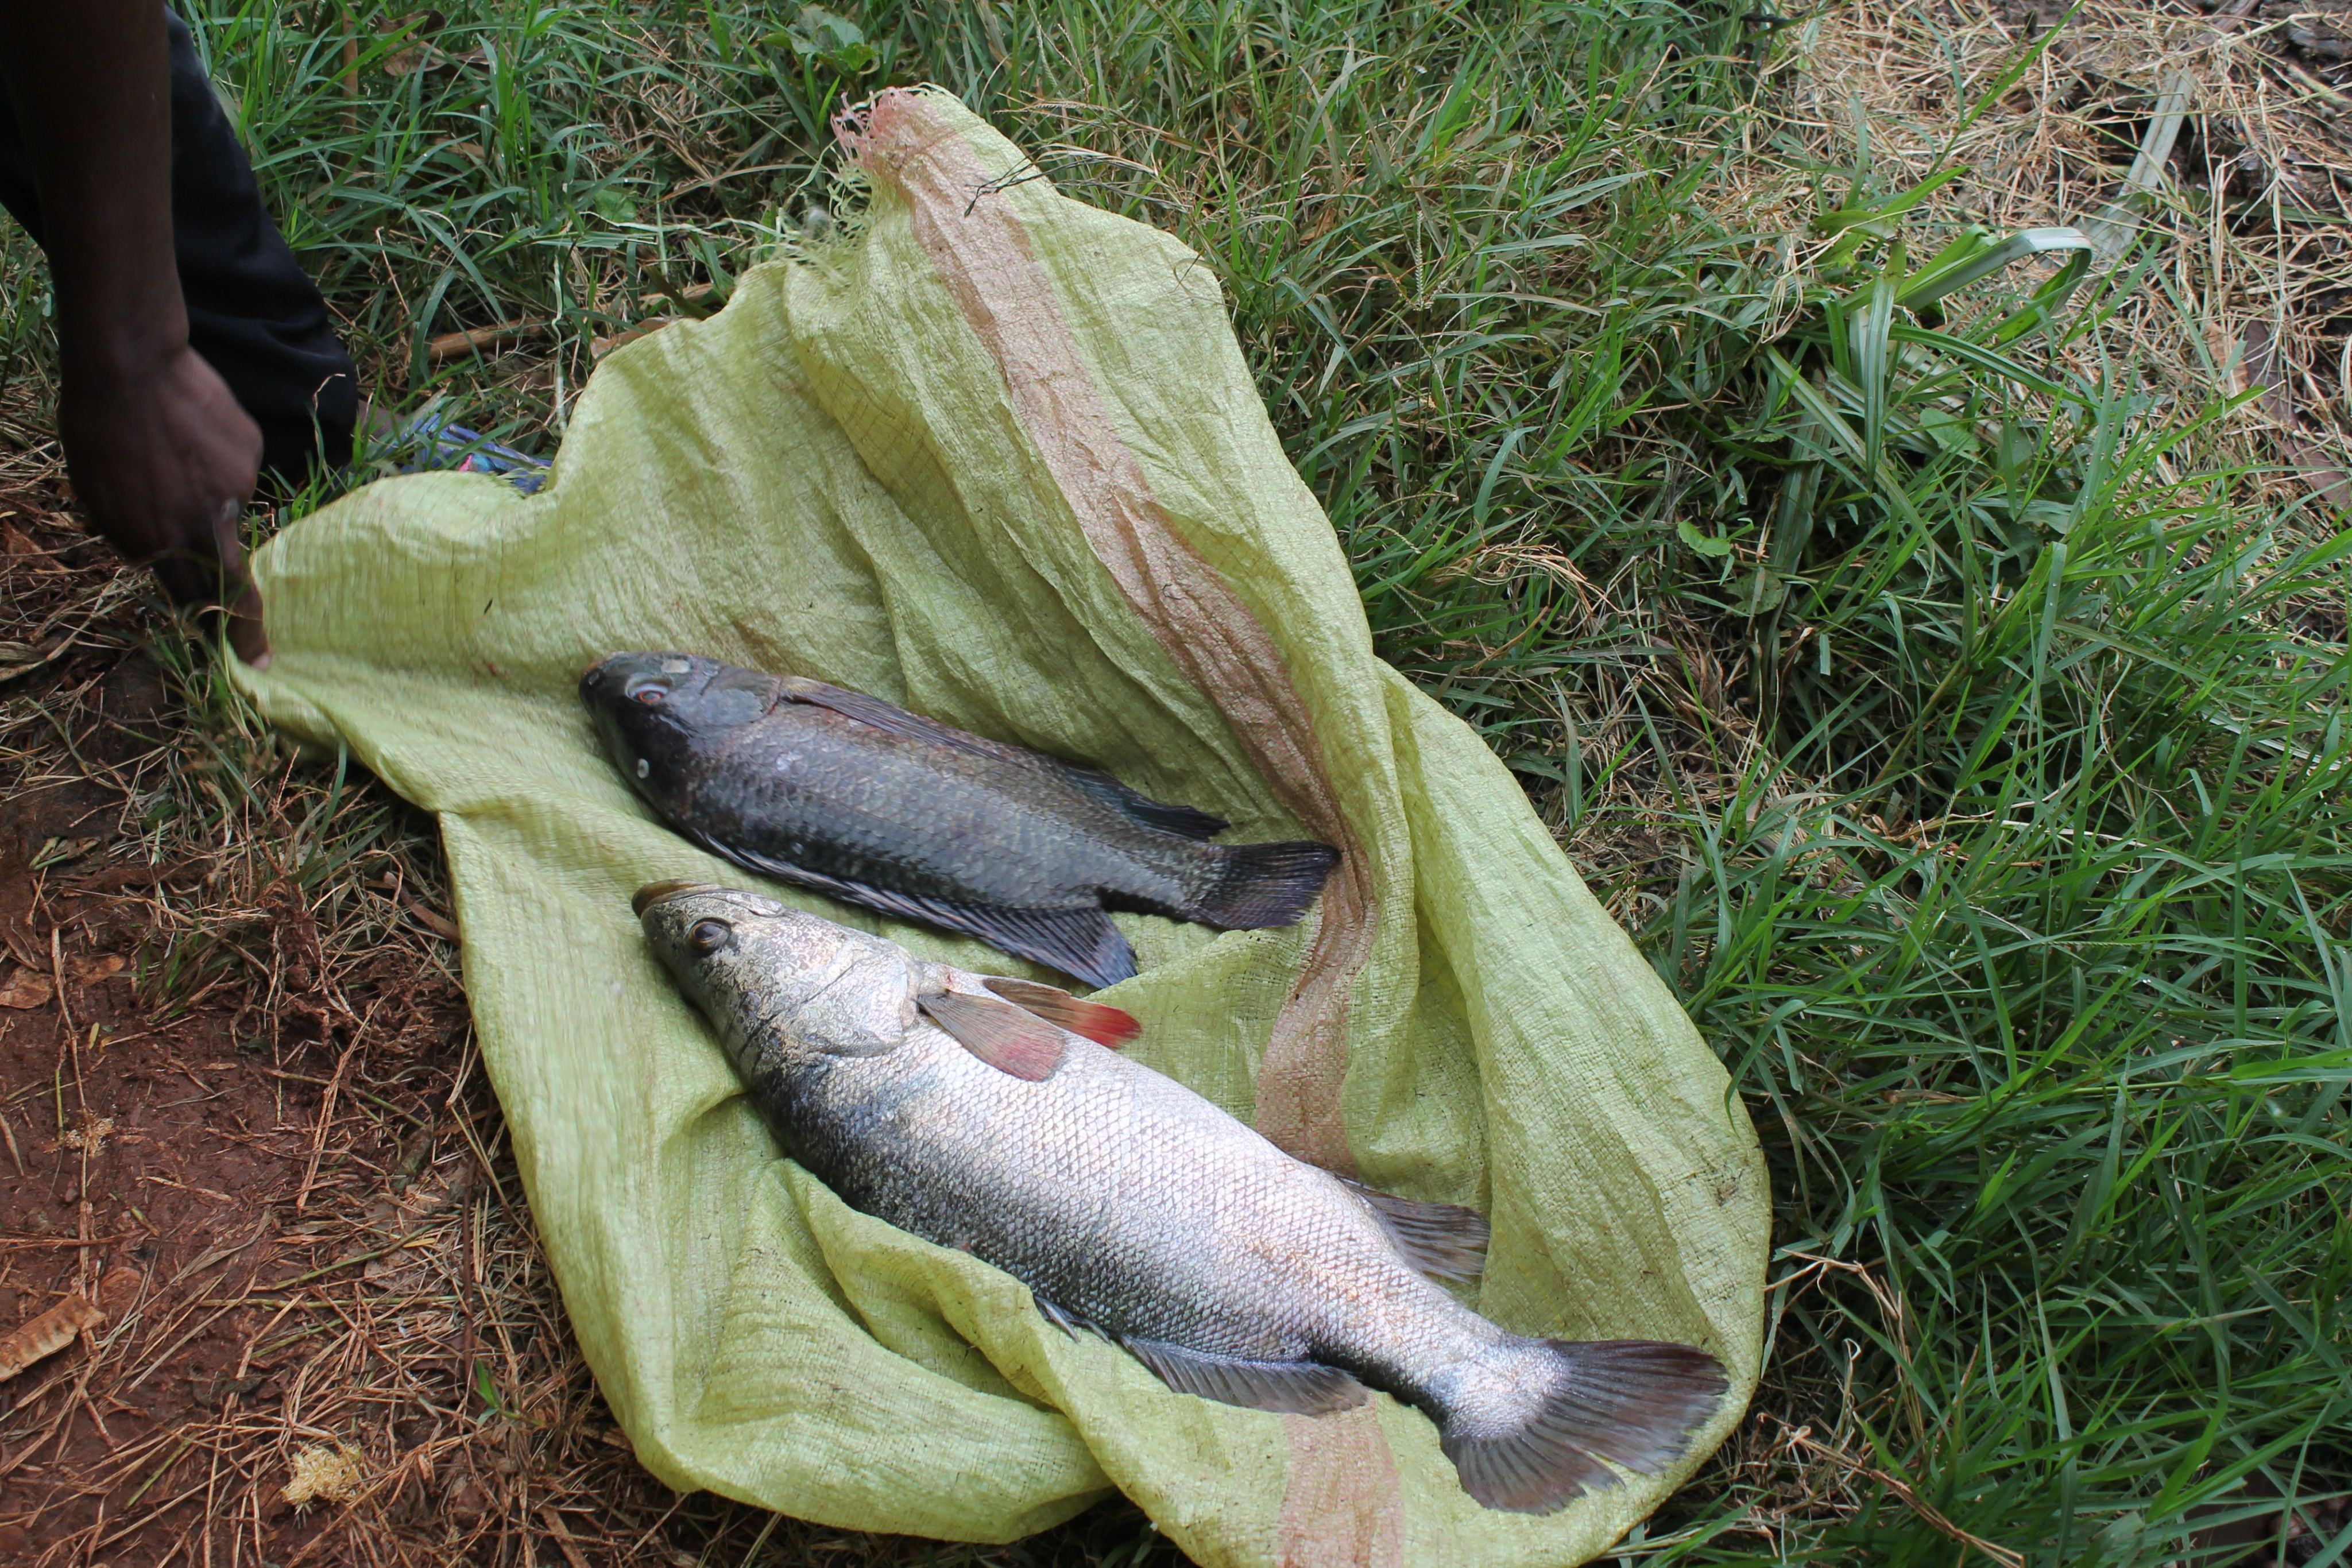 Cage farming can protect Lake Victoria's fish. But regulations need  tightening